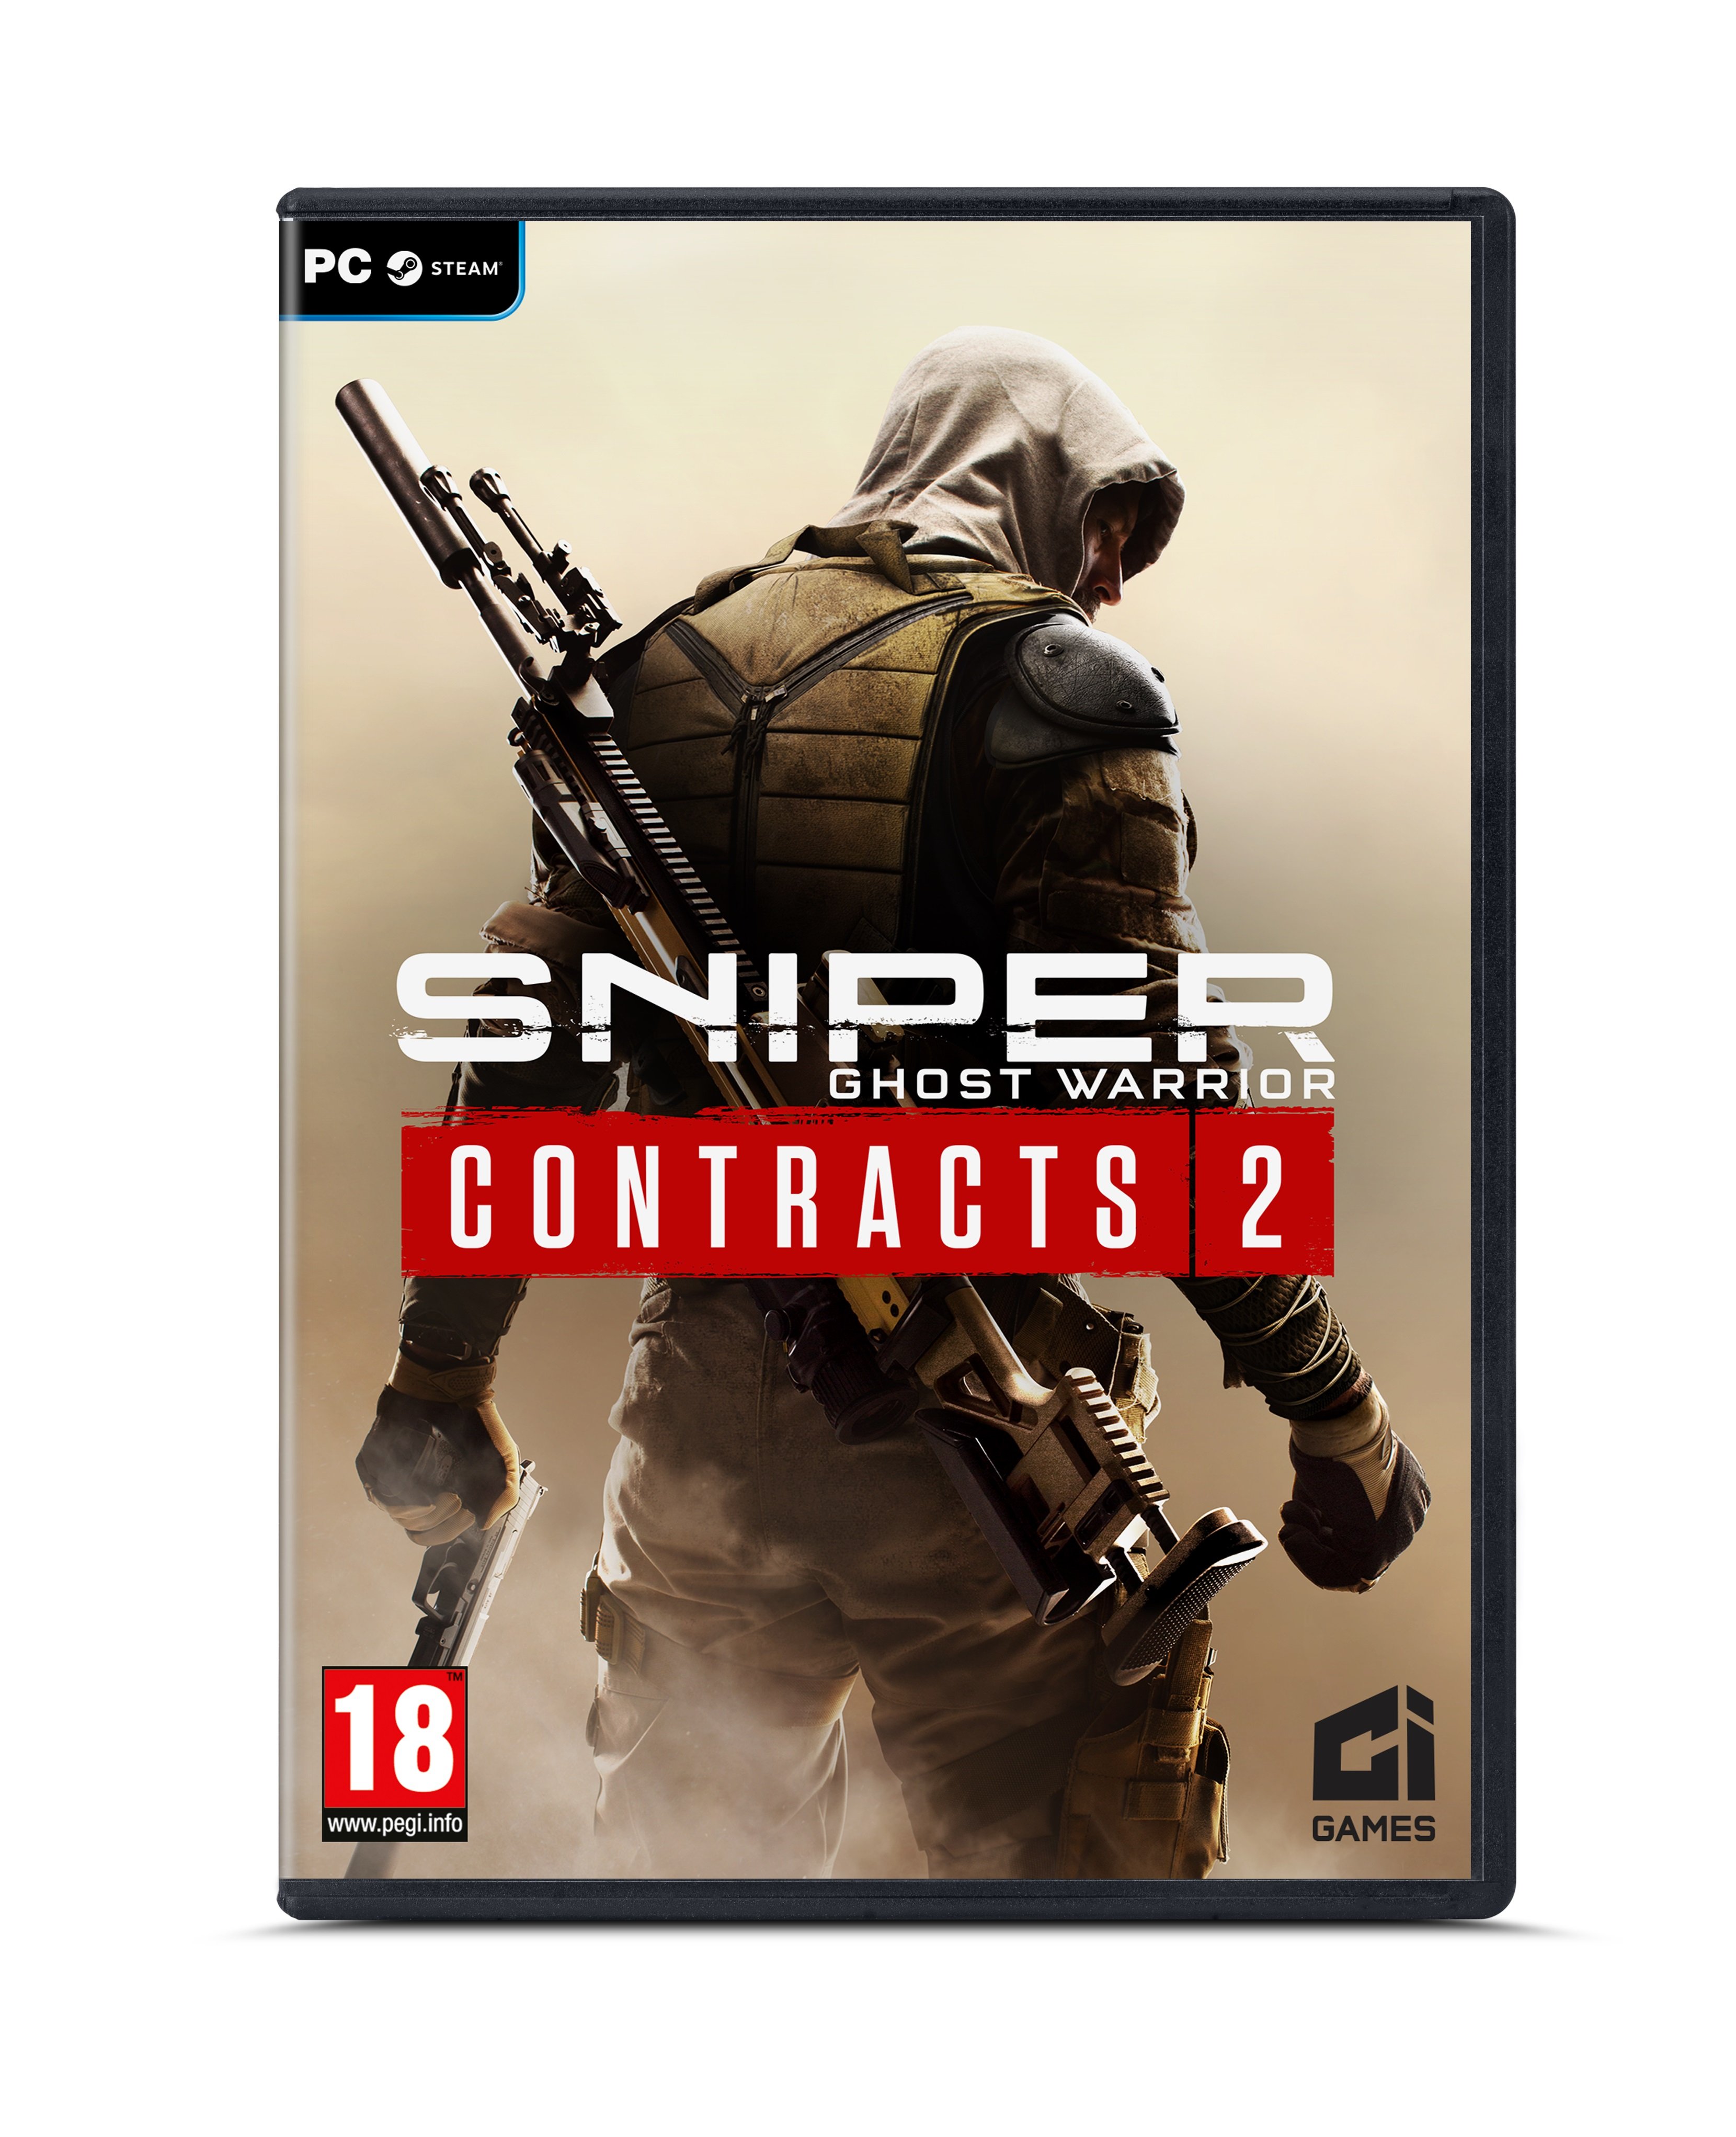 download free ghost warrior contracts